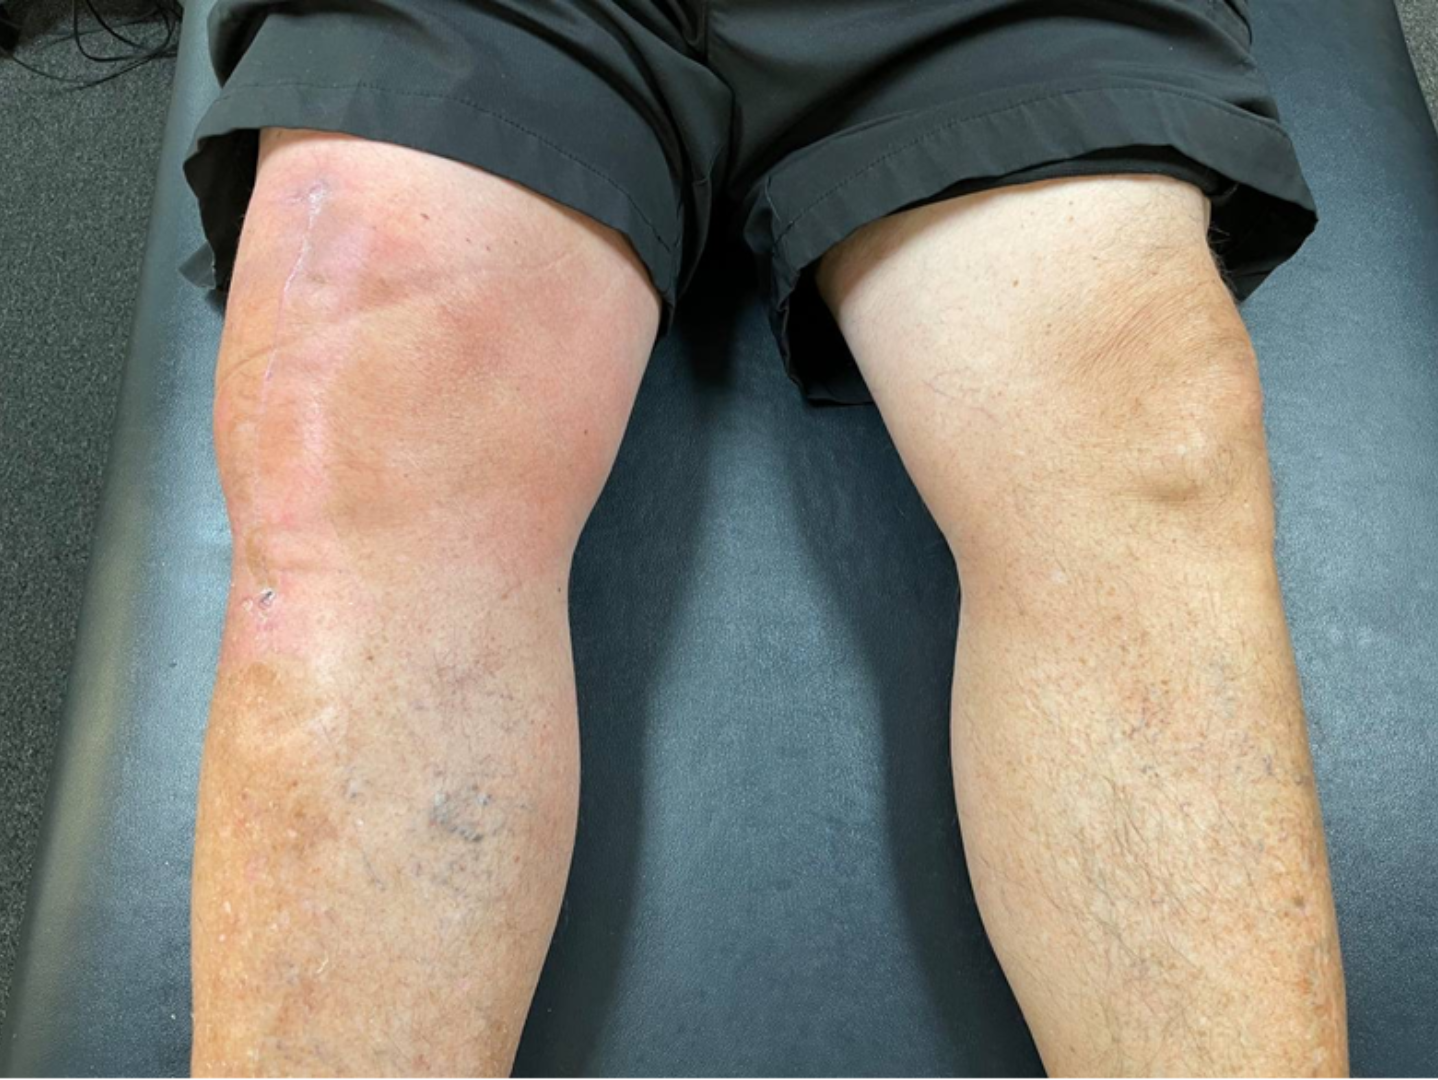 Why Does Swelling Occur After an Injury?